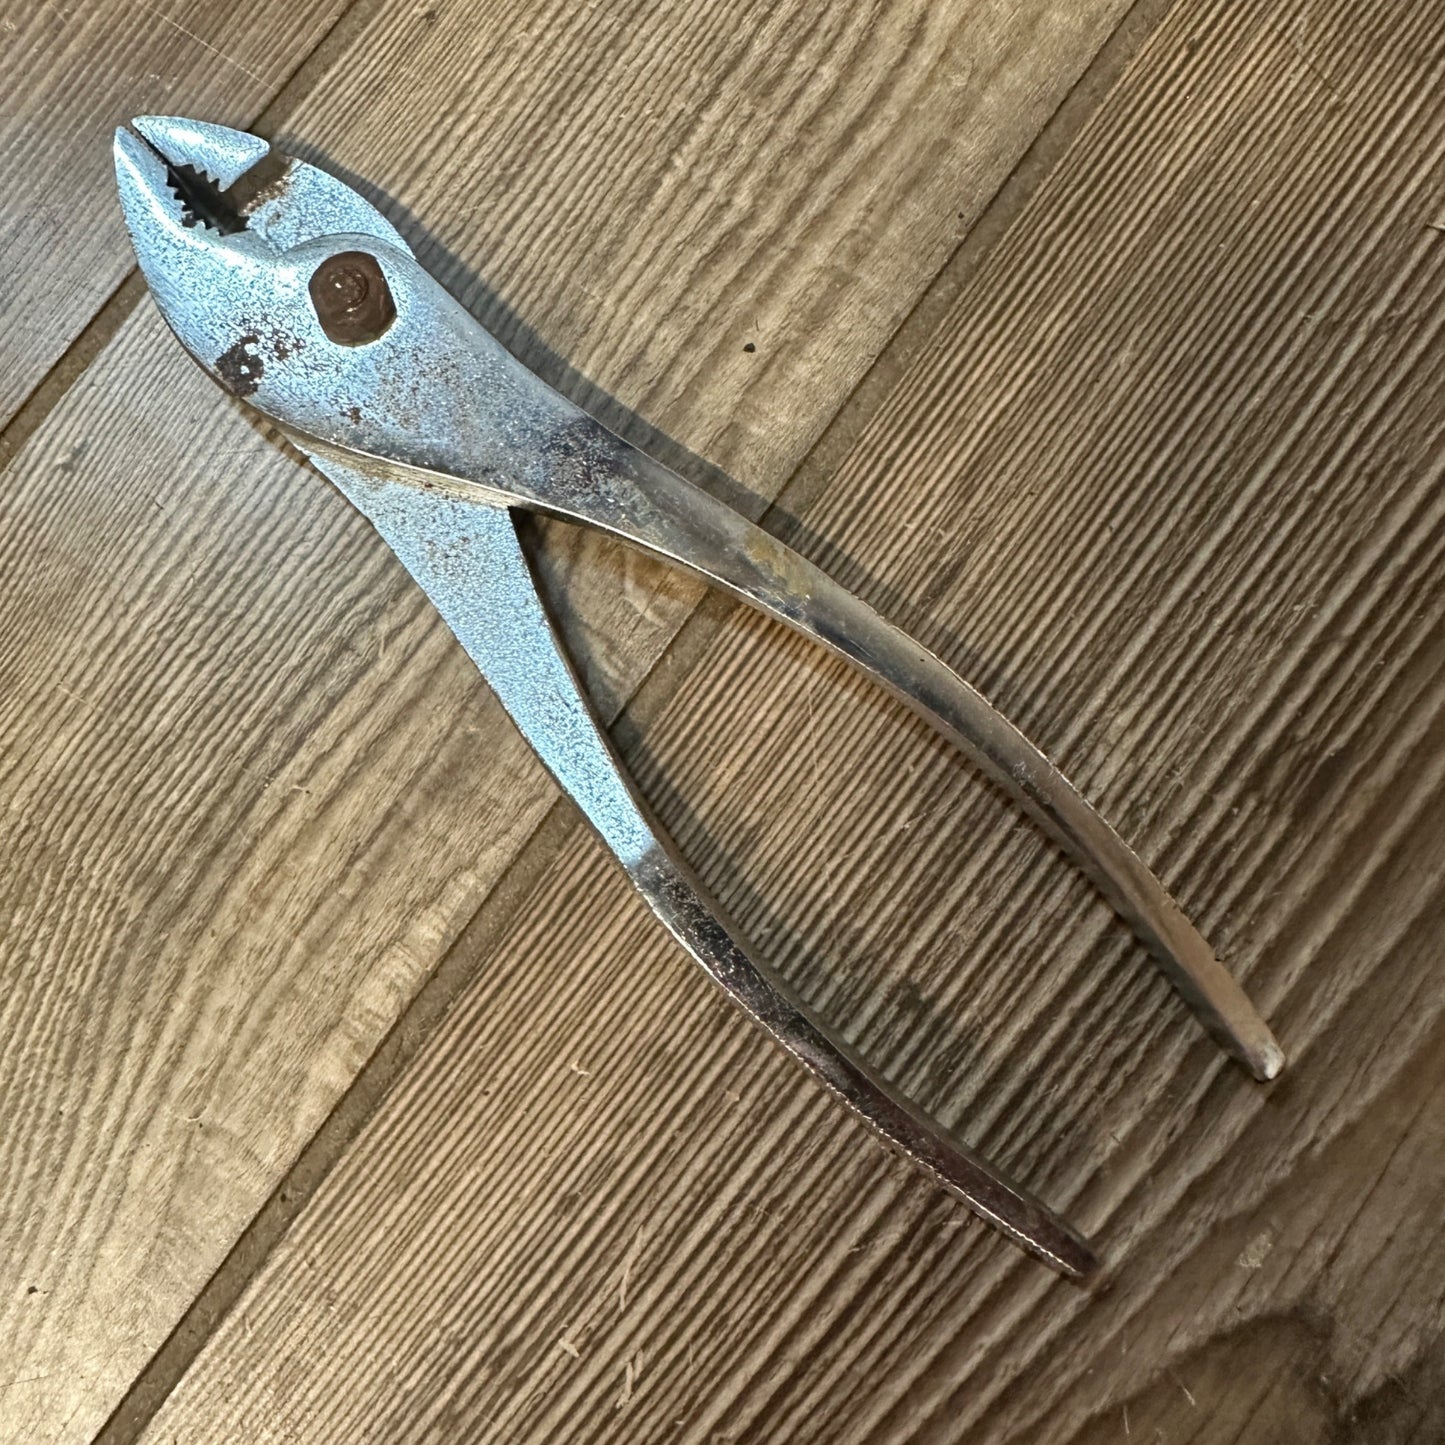 VINTAGE CRESCENT SLIP JOINT PLIERS 8" LONG MODEL G-28 MADE IN U.S.A